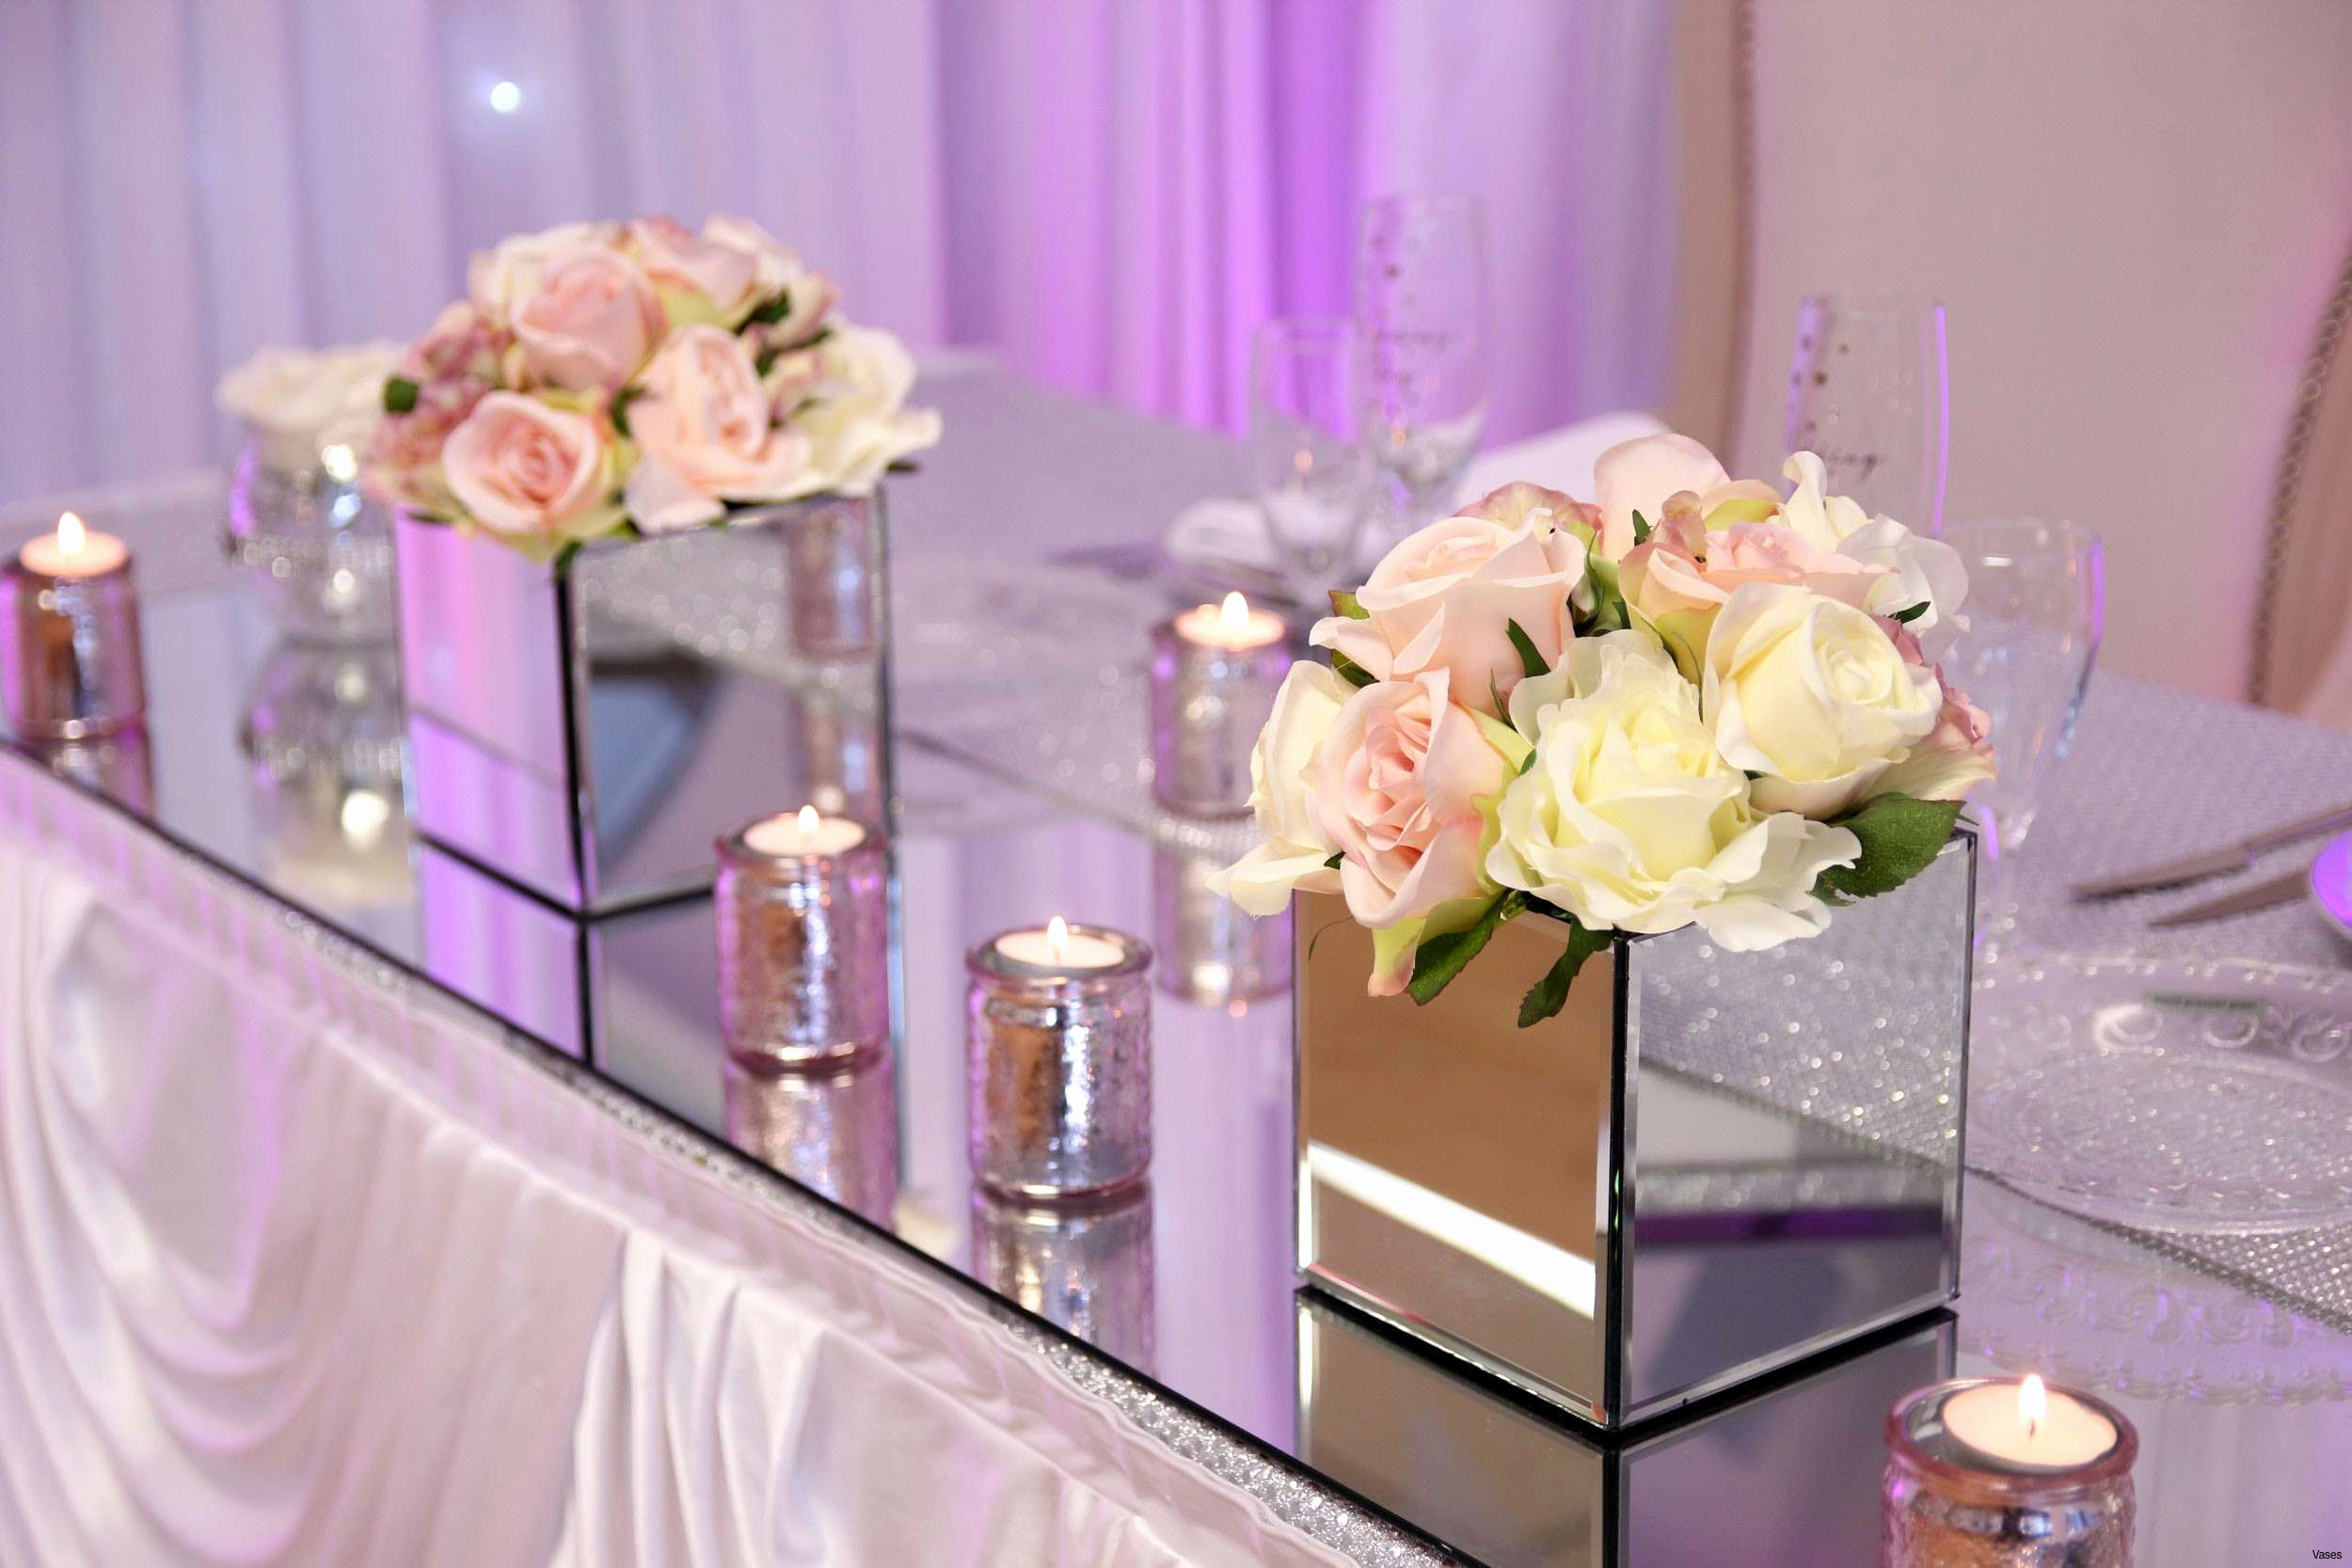 14 Fabulous 6 Cube Vase 2024 free download 6 cube vase of wedding on the cheap new decoration for wedding 11 s wedding for wedding on the cheap best of mirrored square vase 3h vases mirror table decorationi 0d weddings